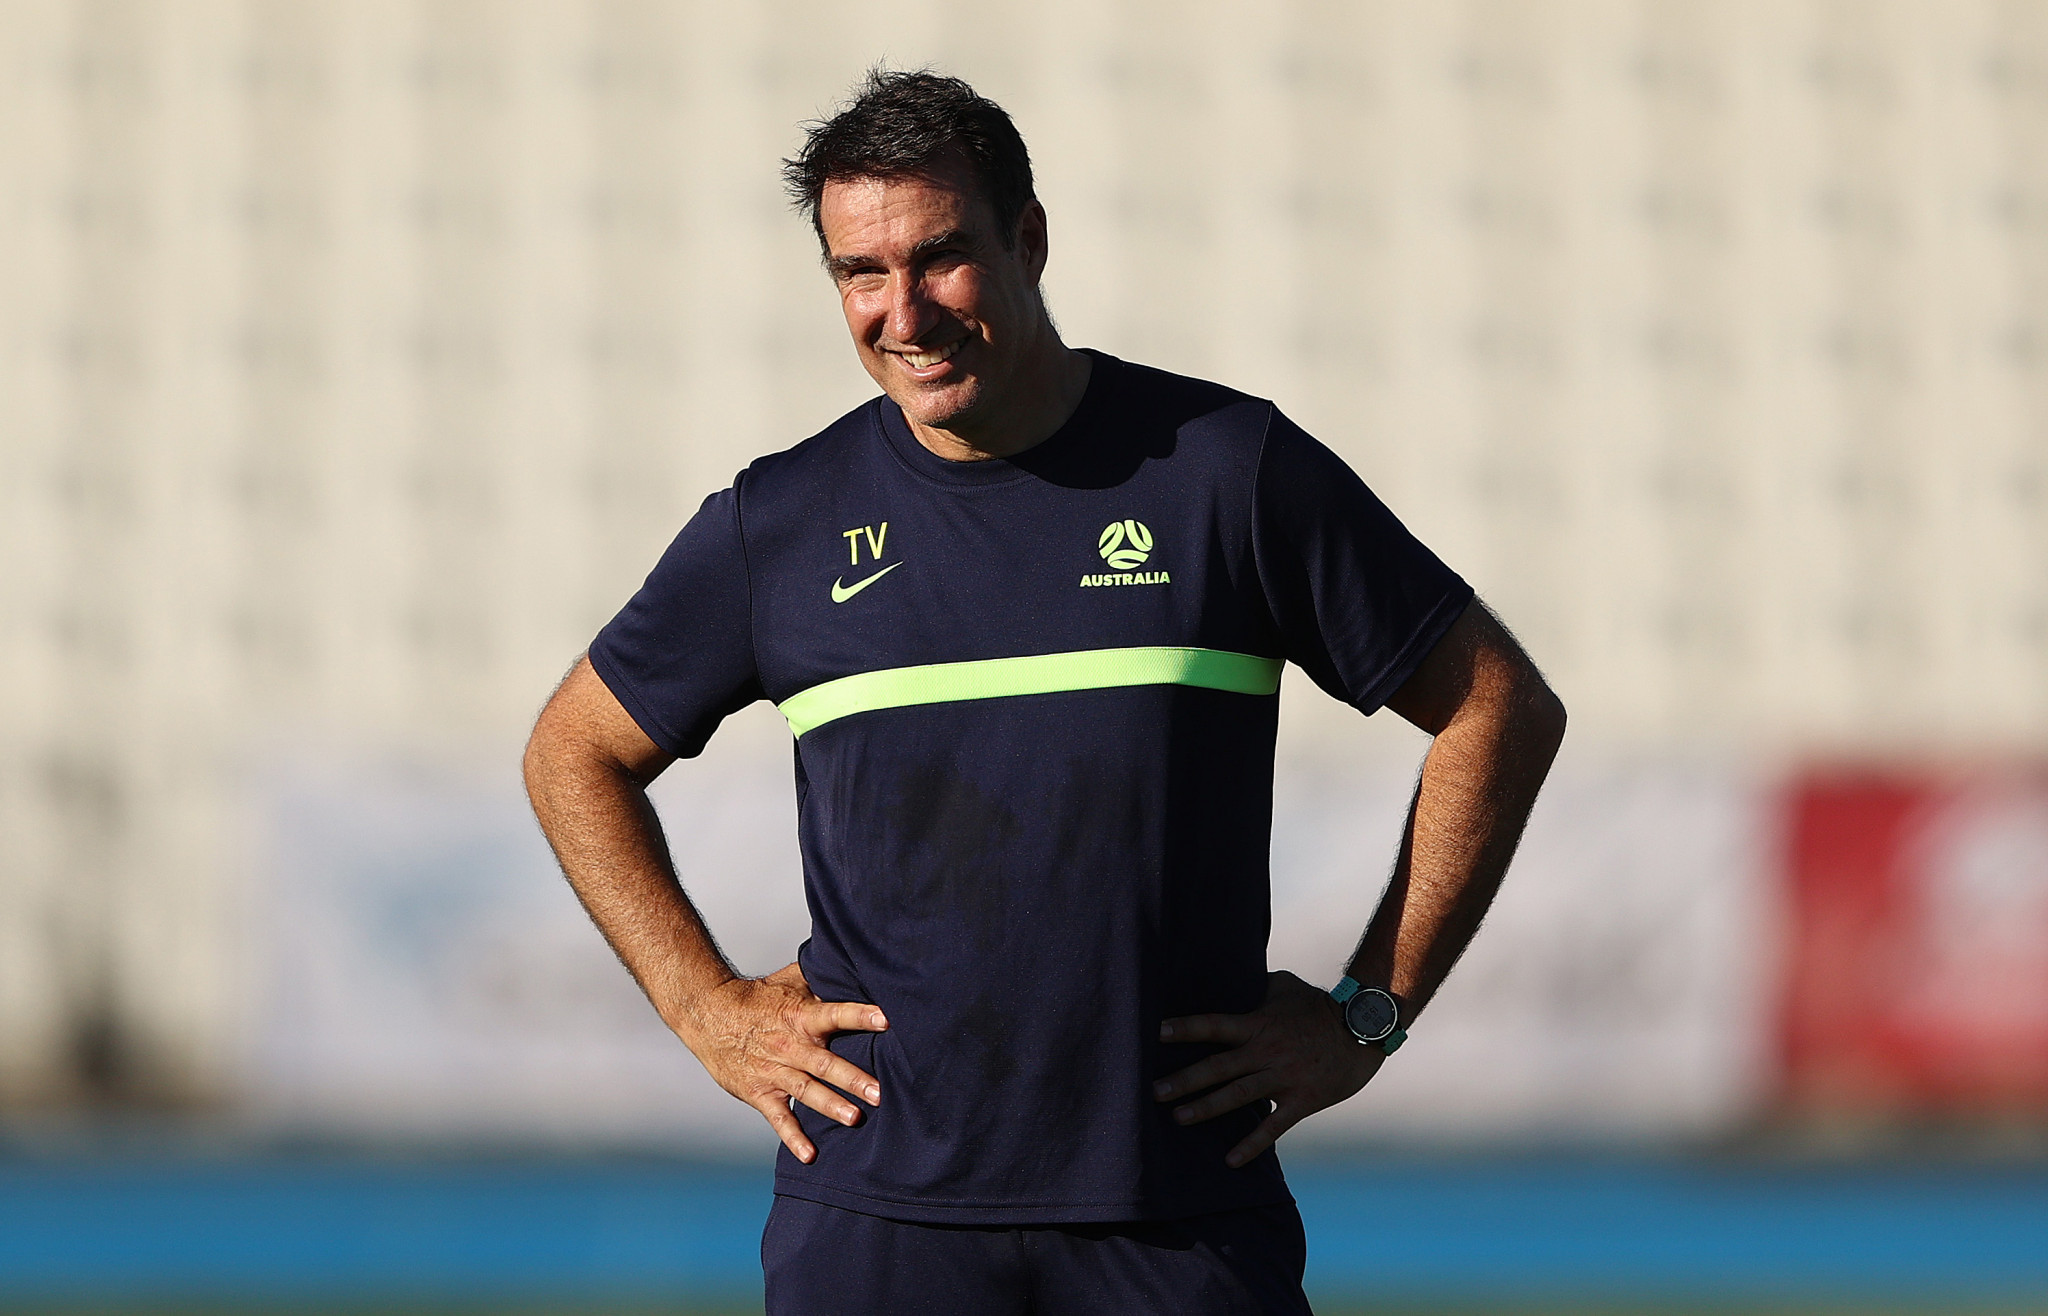 Tony Vidmar is set to coach Australia's men's under-23 football team through their qualification campaign for Paris 2024 ©Getty Images